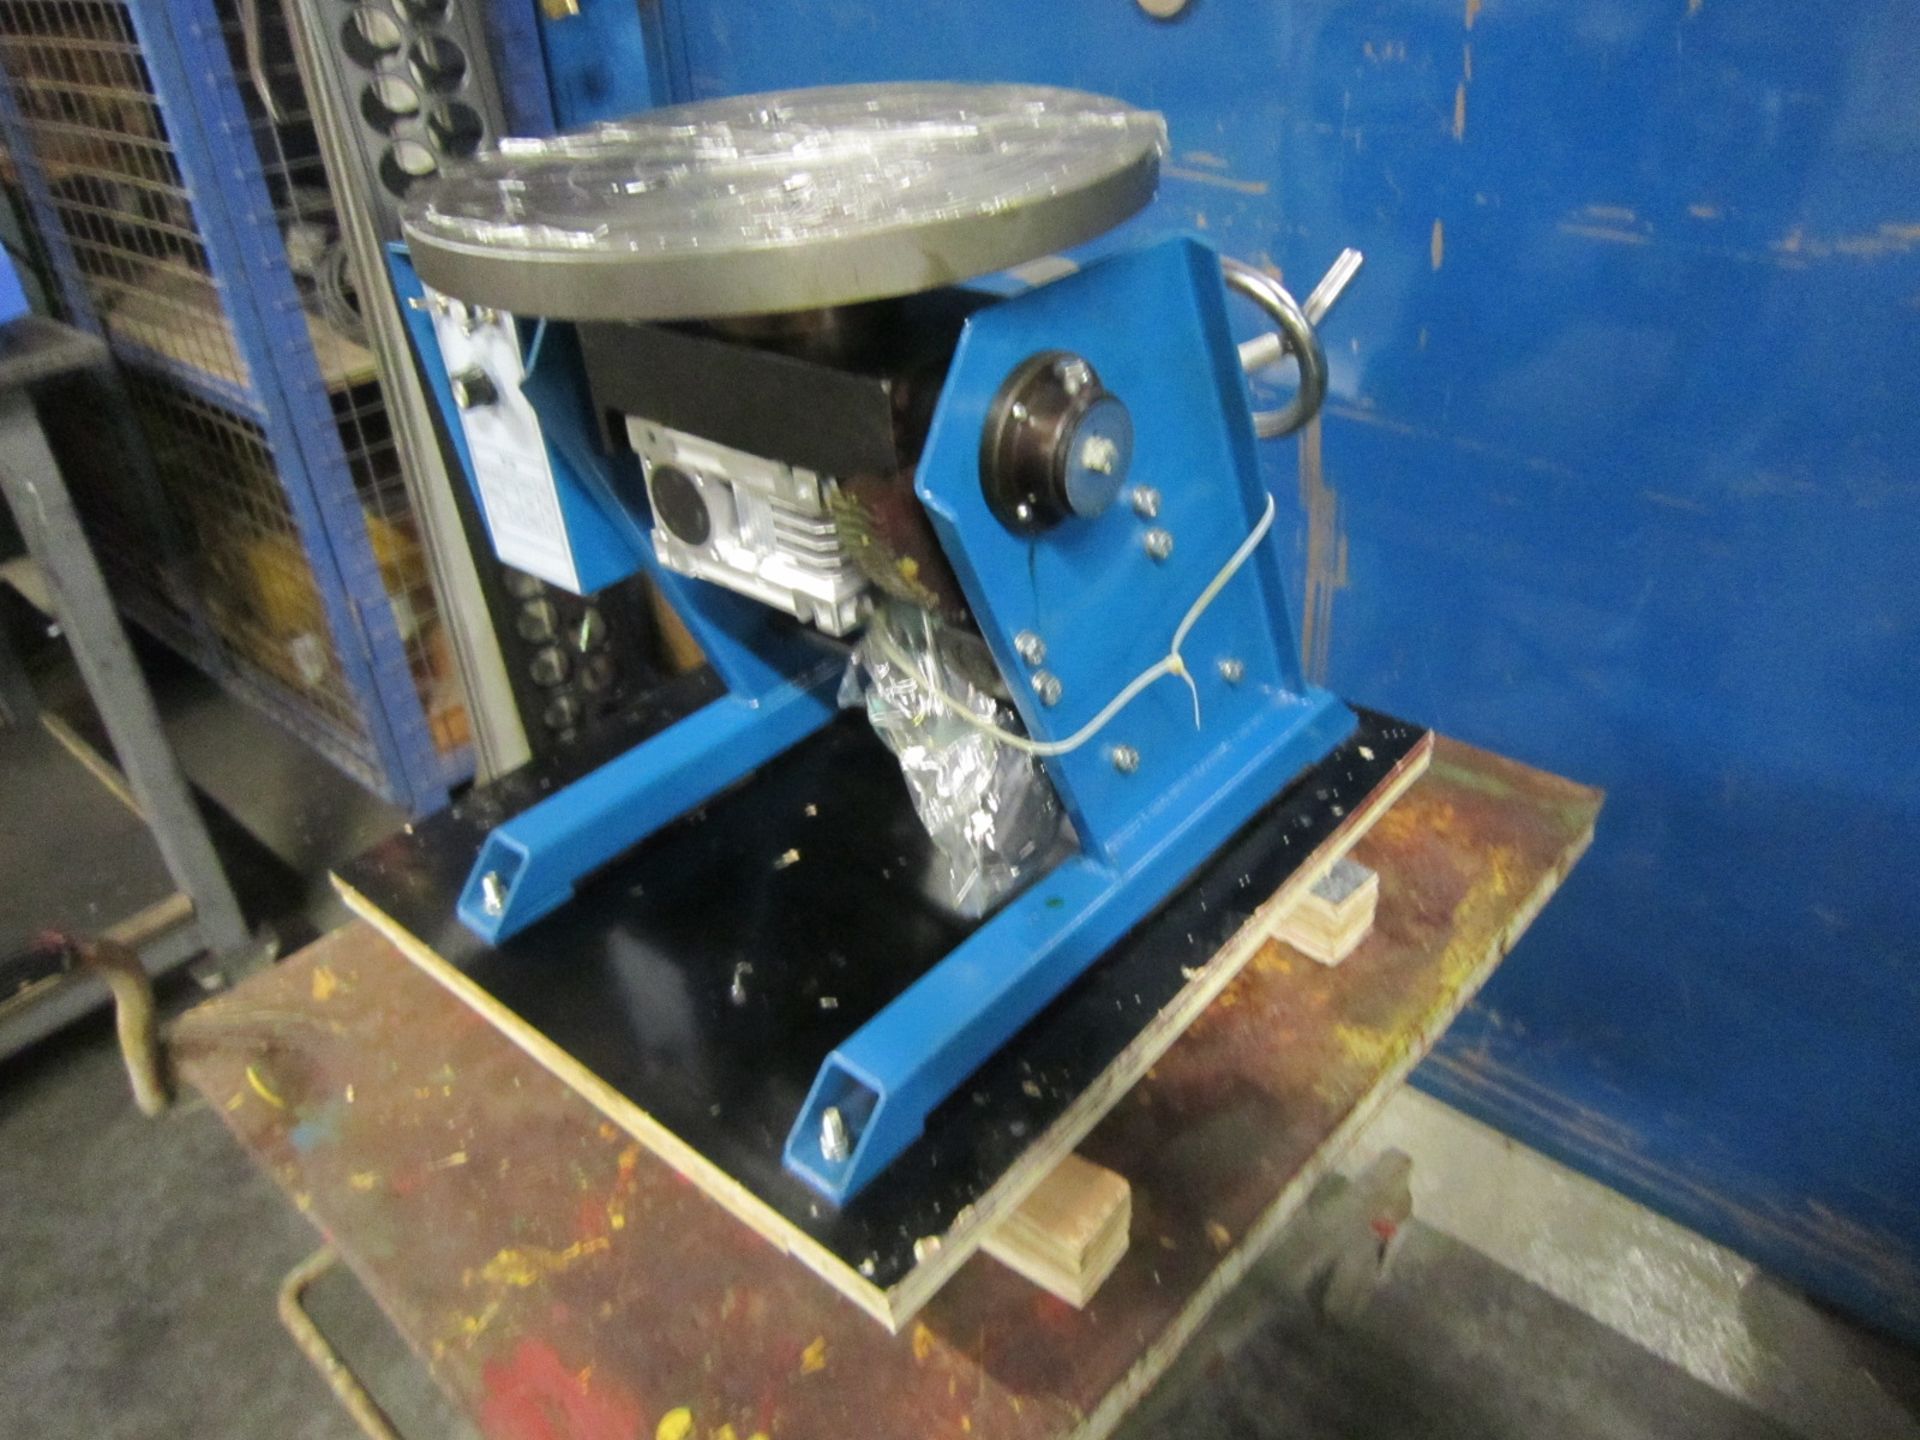 Verner model VD-300 WELDING POSITIONER 300lbs capacity - tilt and rotate with variable speed drive